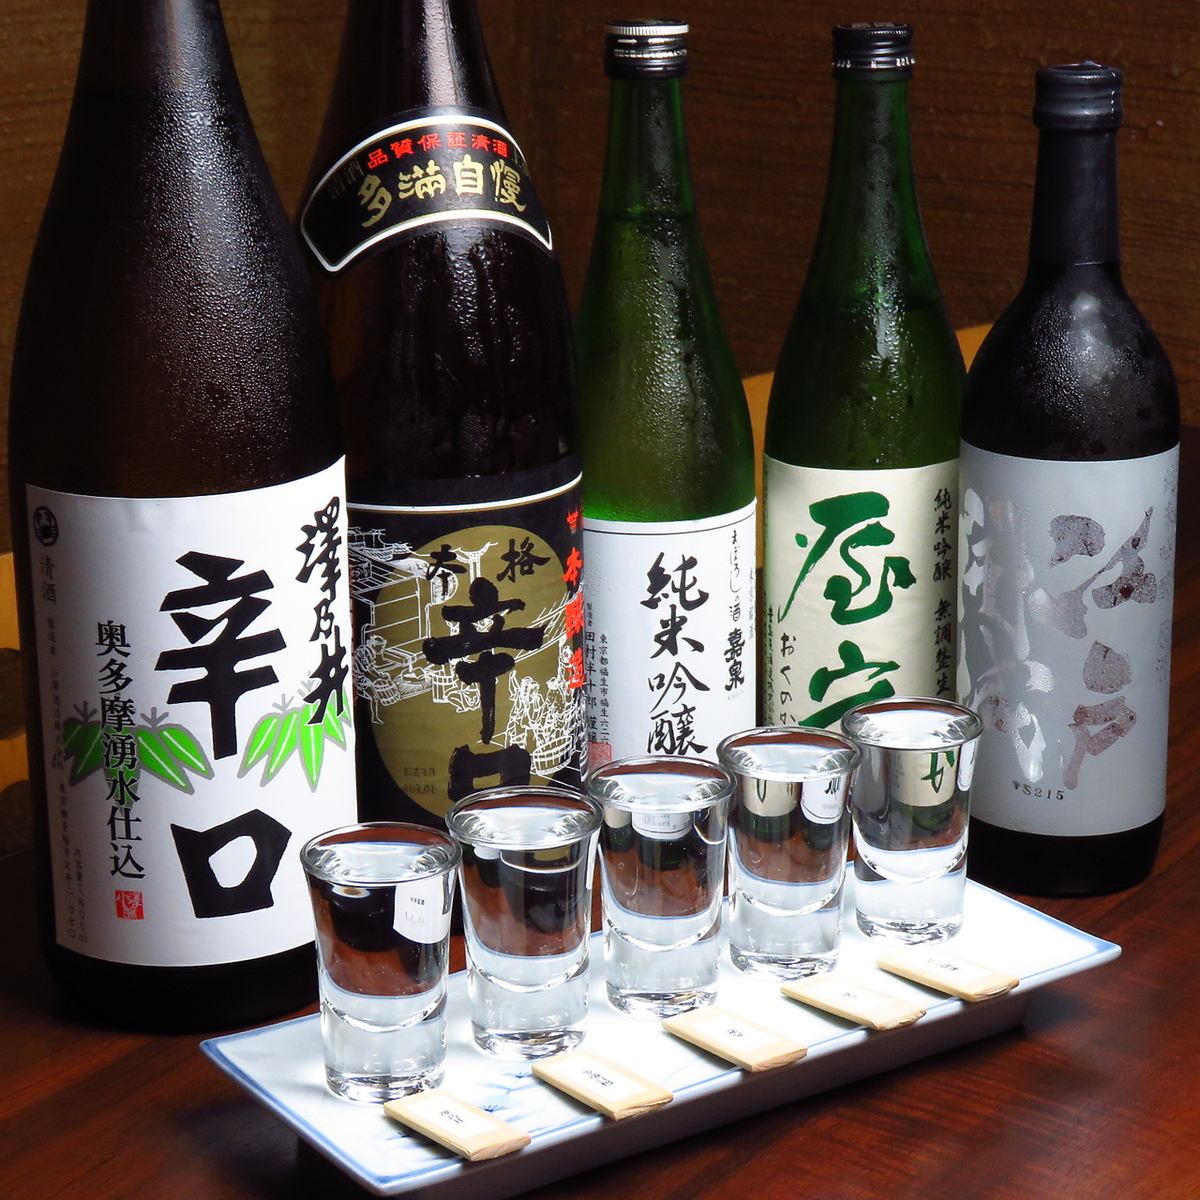 We recommend a set where you can compare and drink sake from Tokyo.